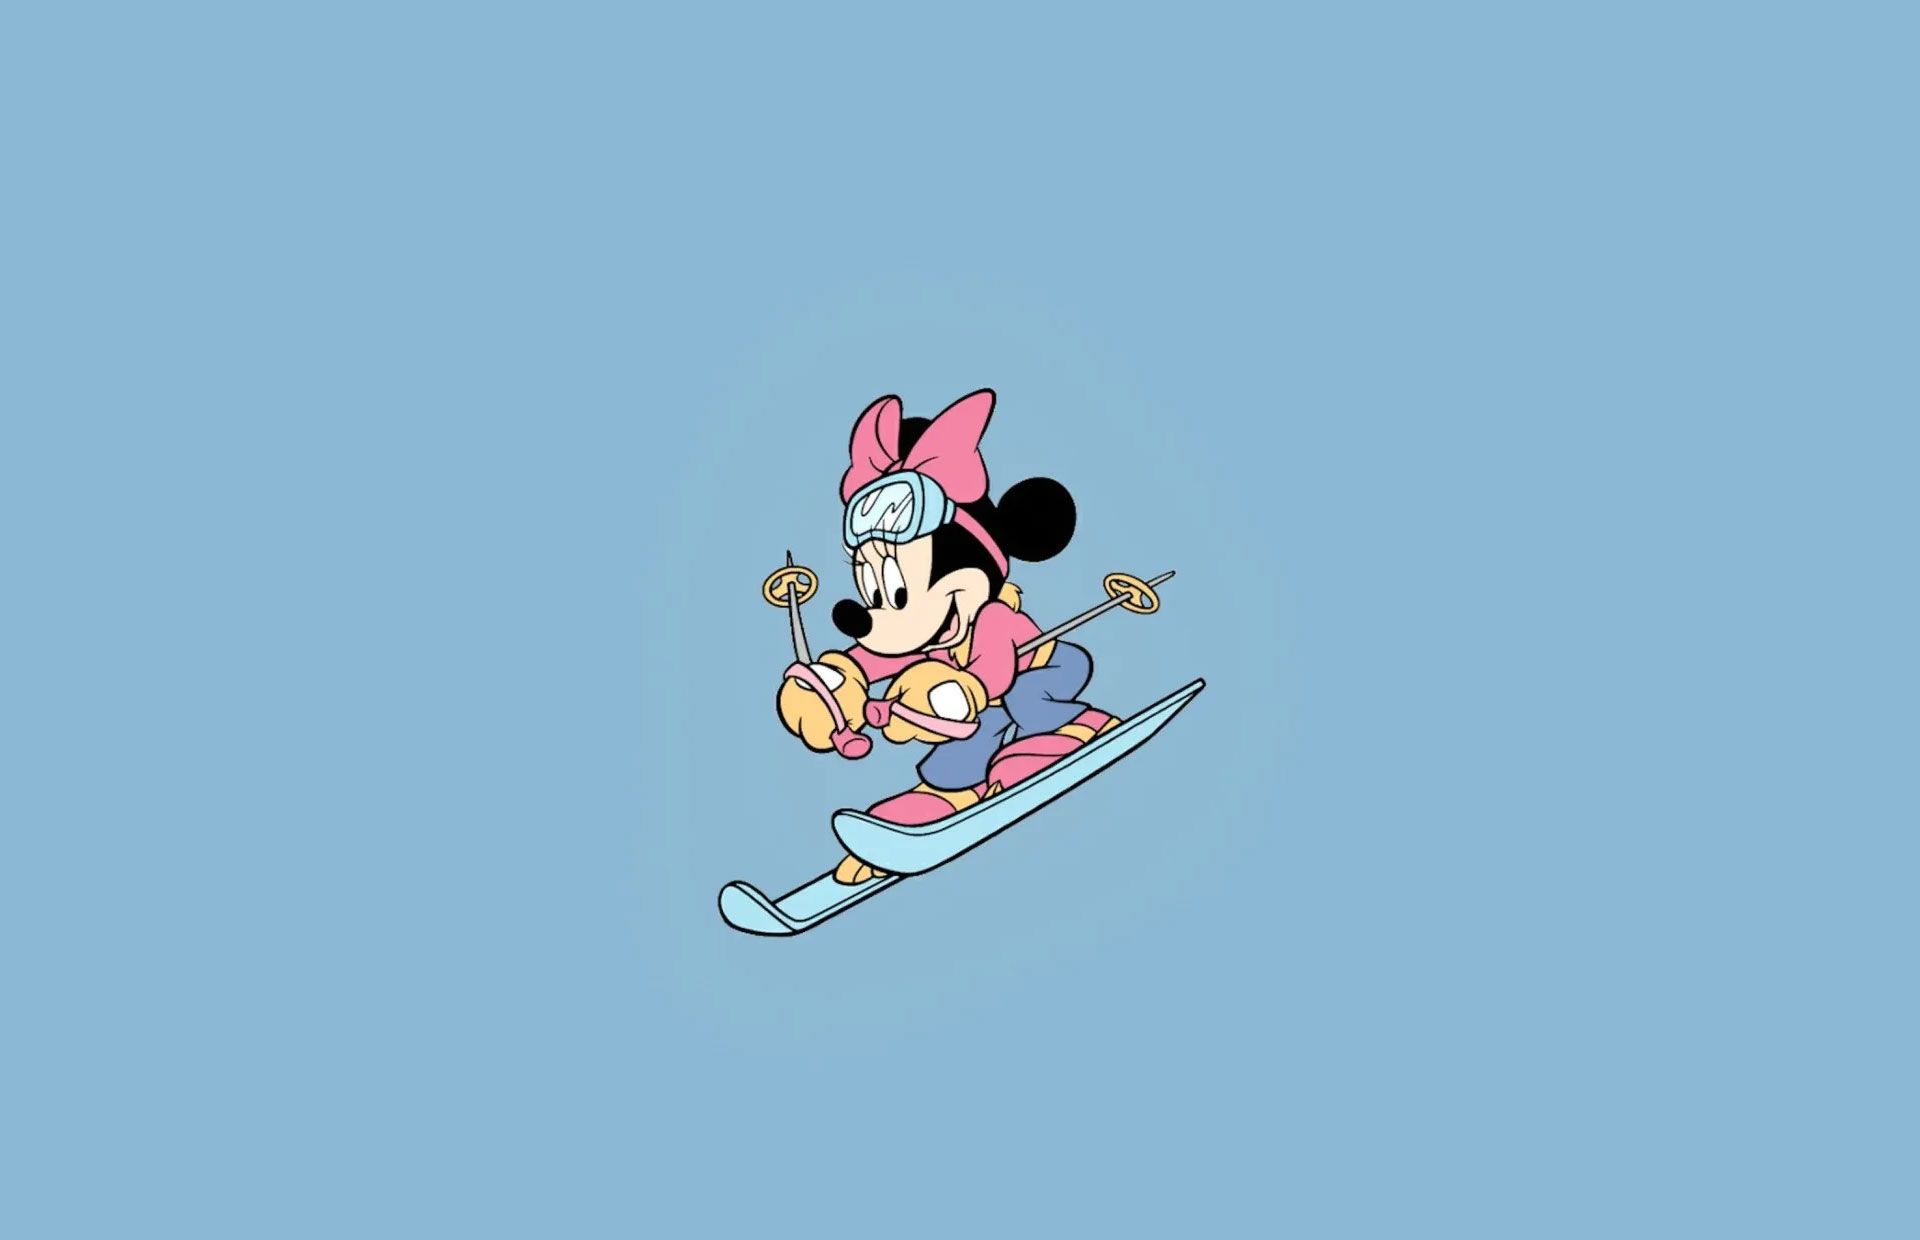 Mickey Mouse Wallpaper For Laptop : Skiing Wallpaper